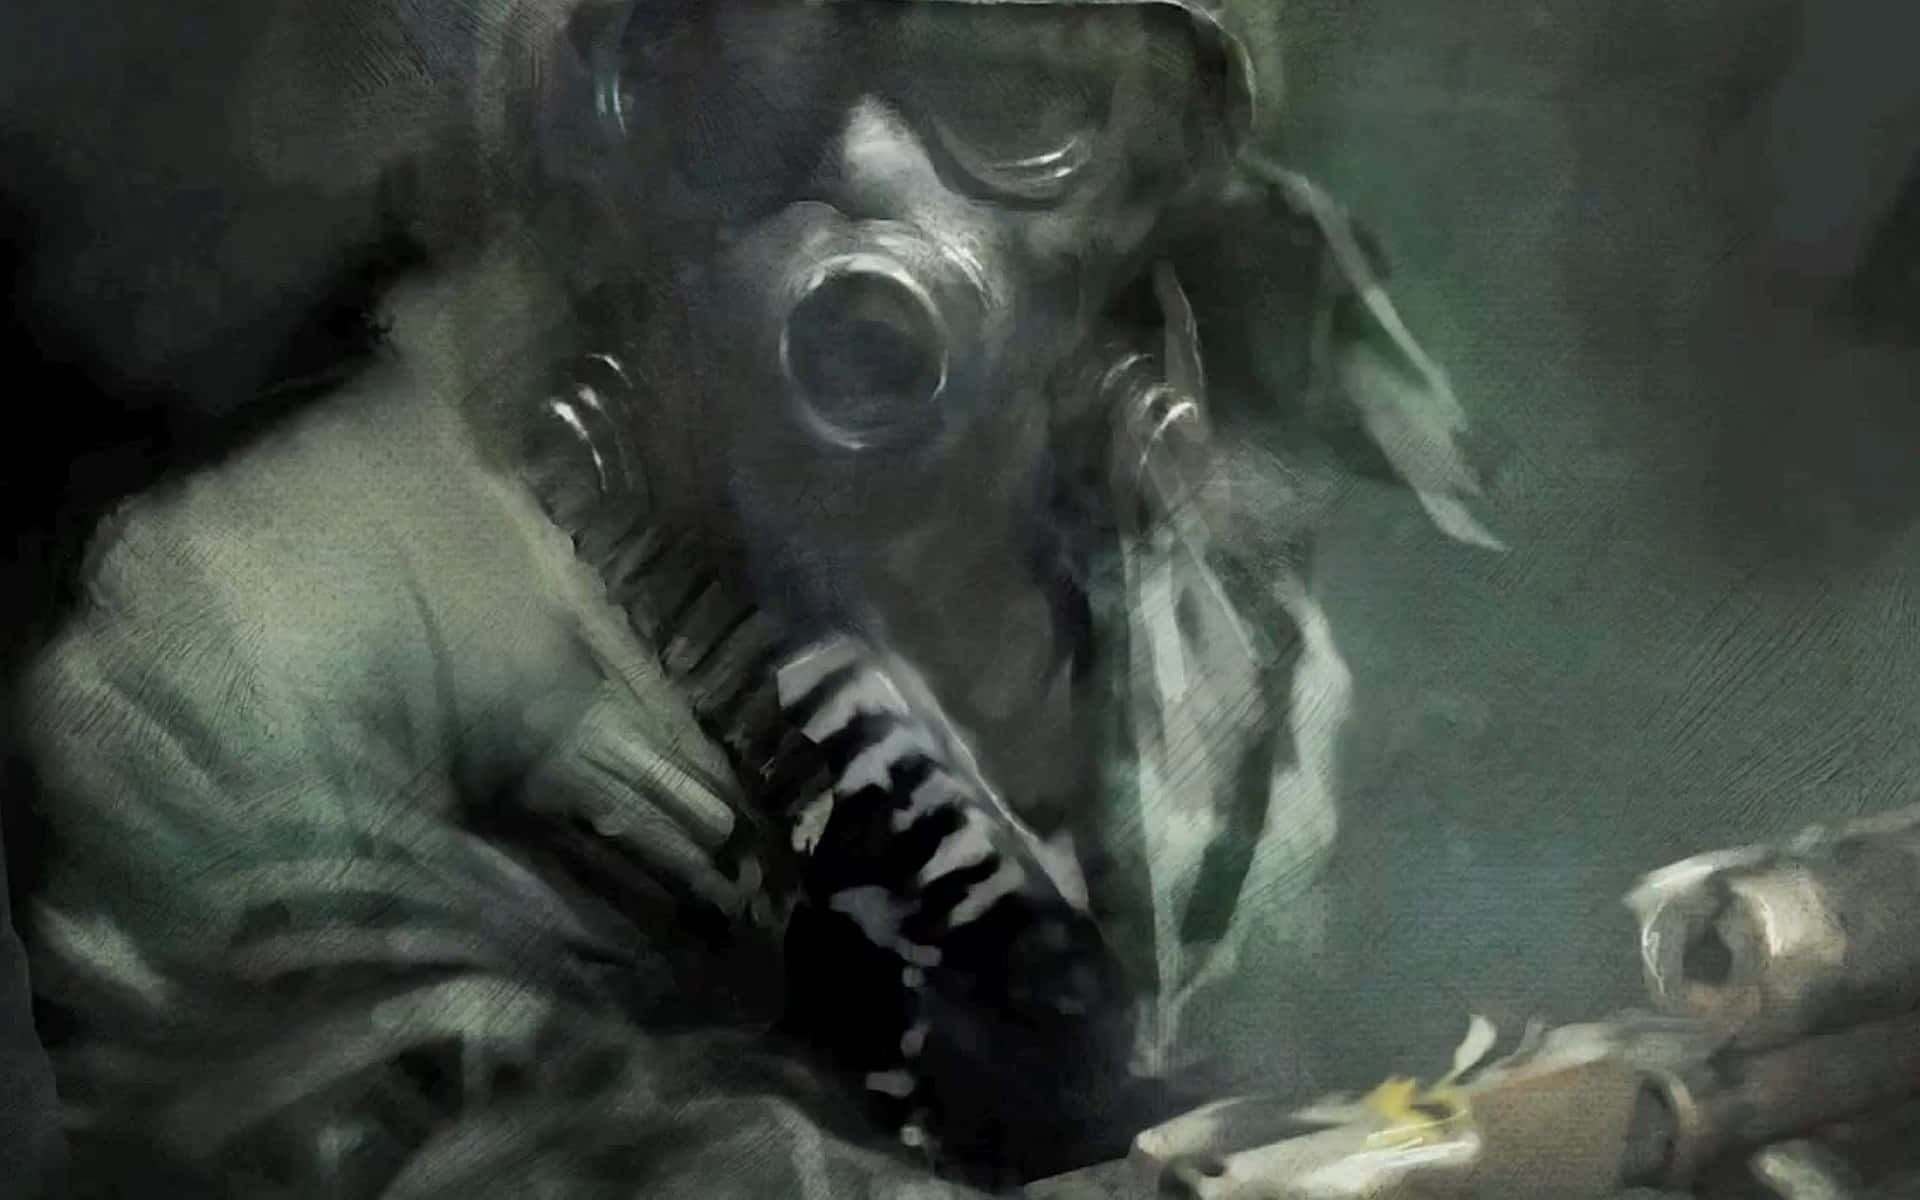 A Painting Of A Soldier In A Gas Mask Holding A Gun